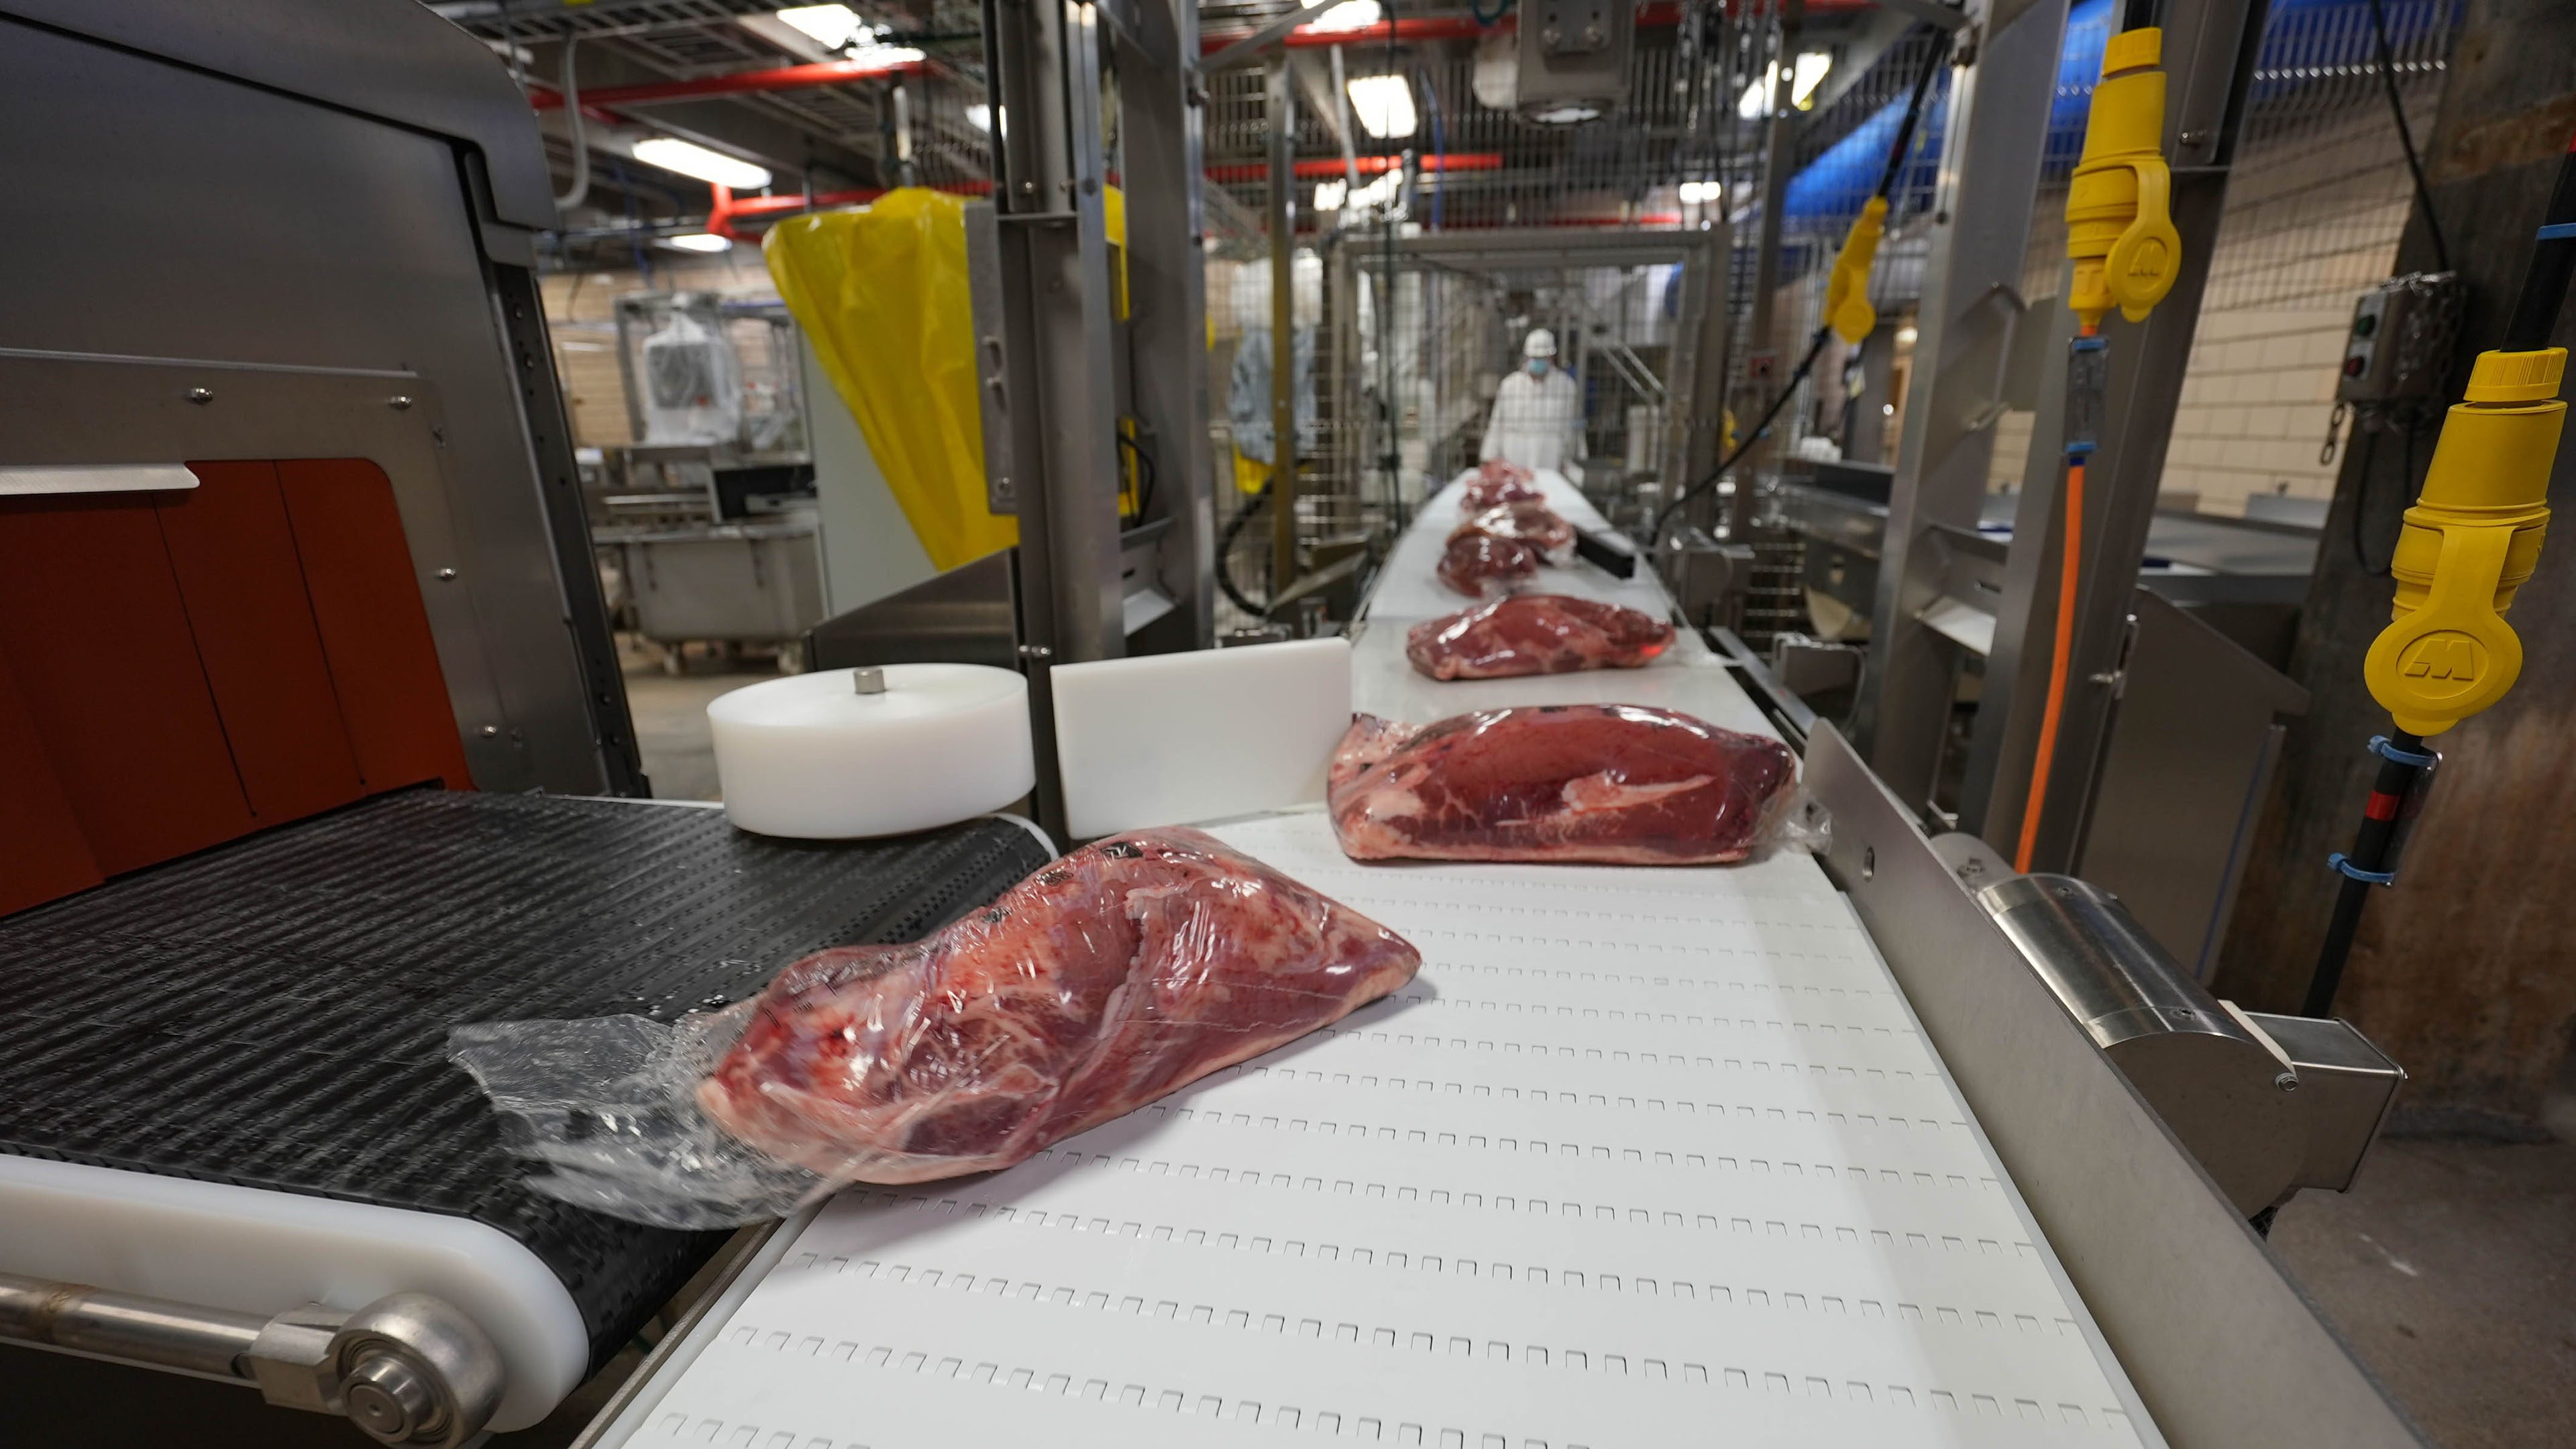 plastic bags filled with meat on a conveyor belt